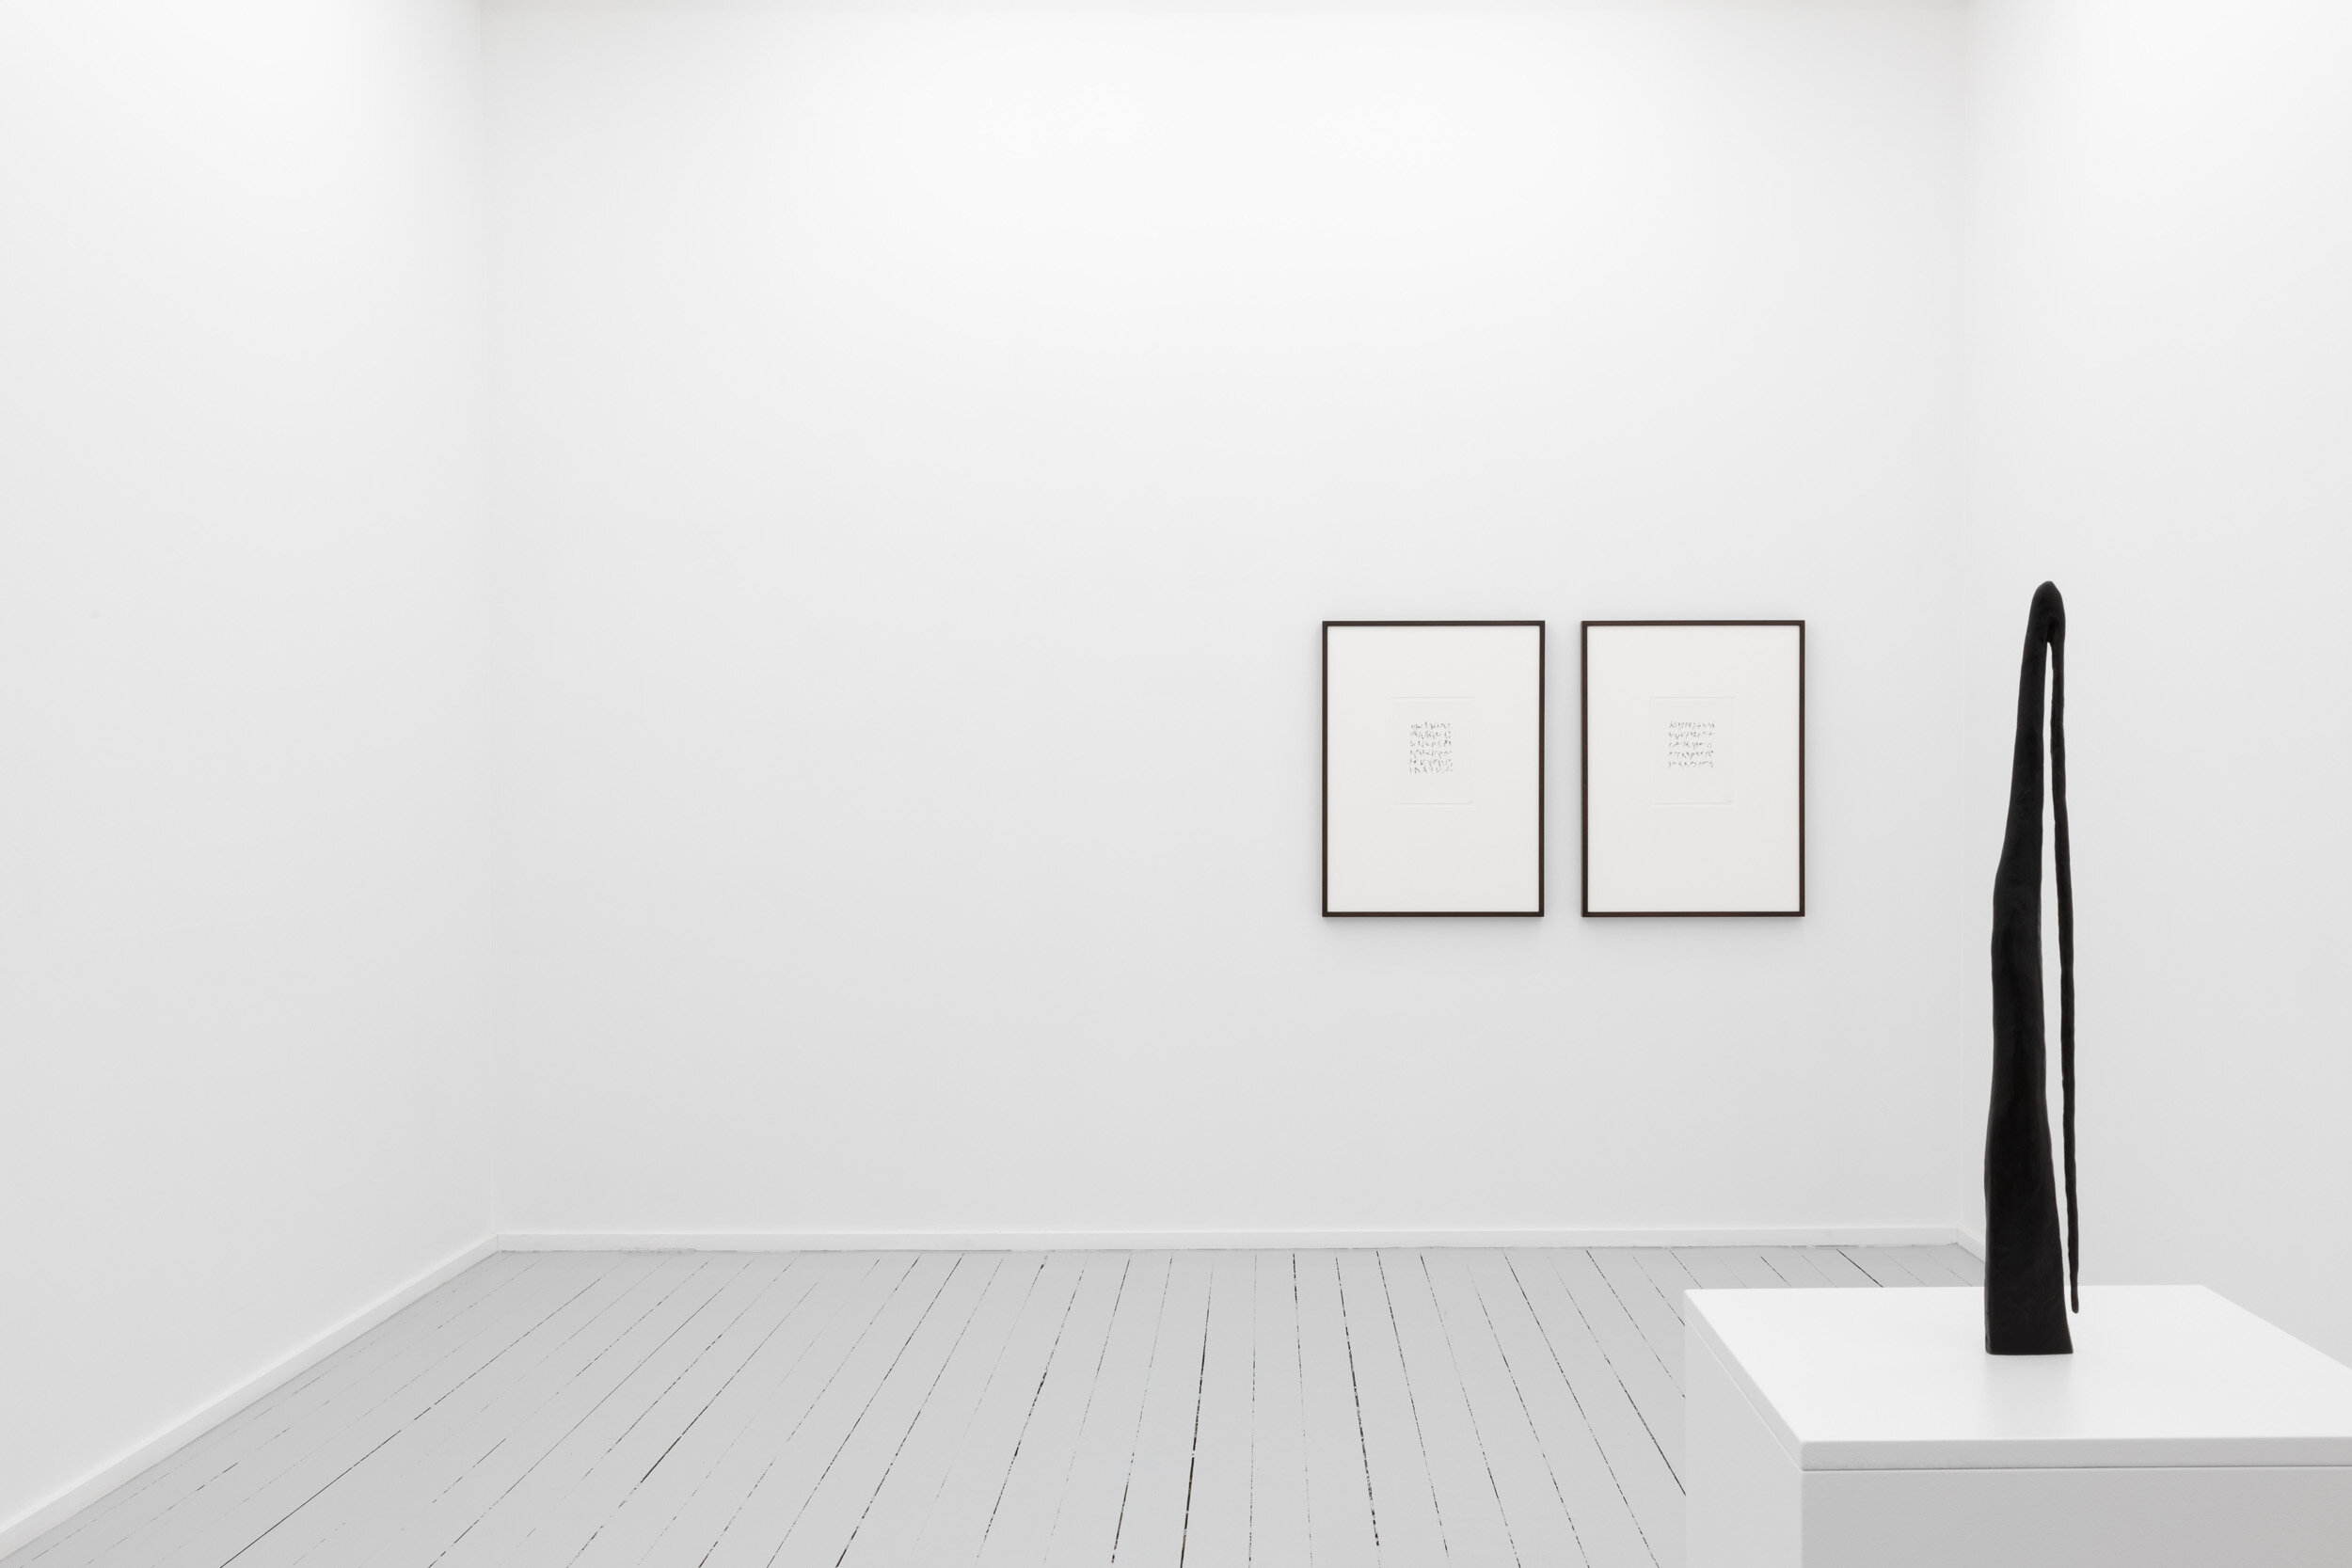  Installation view, Jan Groth ‘Signs and Figures’, Galleri Riis, Oslo 2019. Photographer: Adrian Bugge 